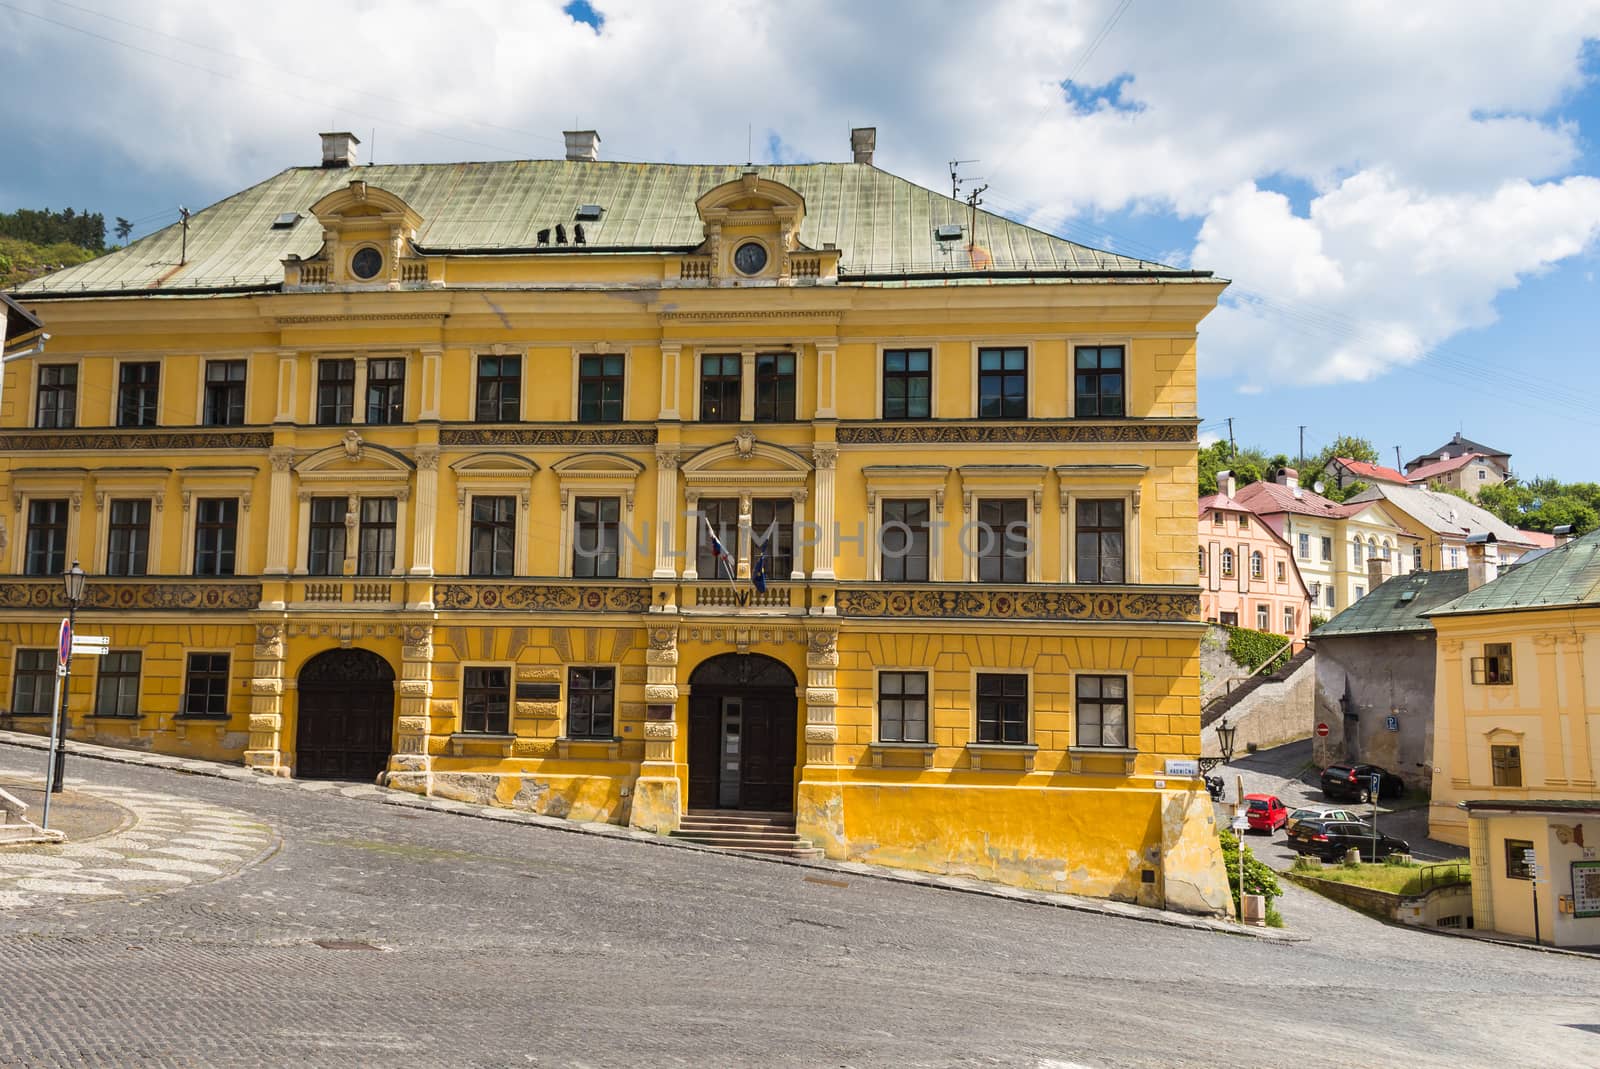 Yellow building called Fritz´s house on the City Hall Square in Banska Stiavnica, Slovakia, former mining city. Cloudy sky.